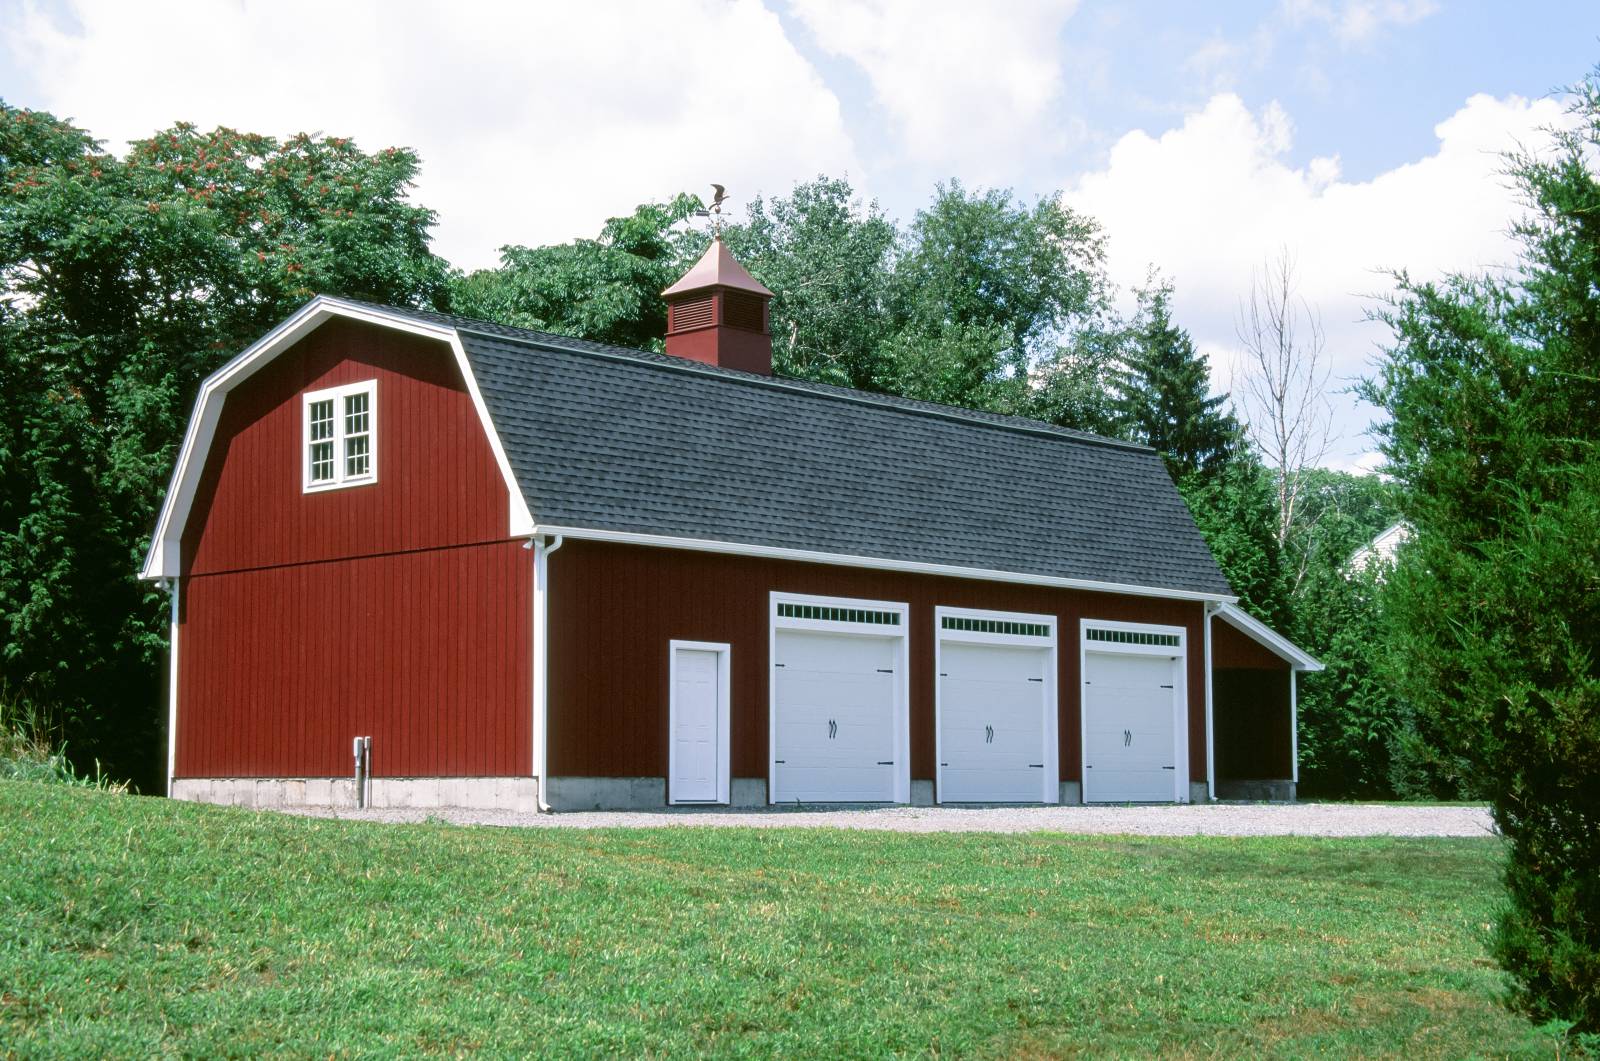 Gambrel-Style 1 Â½ Story Garage • 3 Overhead Doors with Transom Windows Above • Barn Red Paint • White Trim